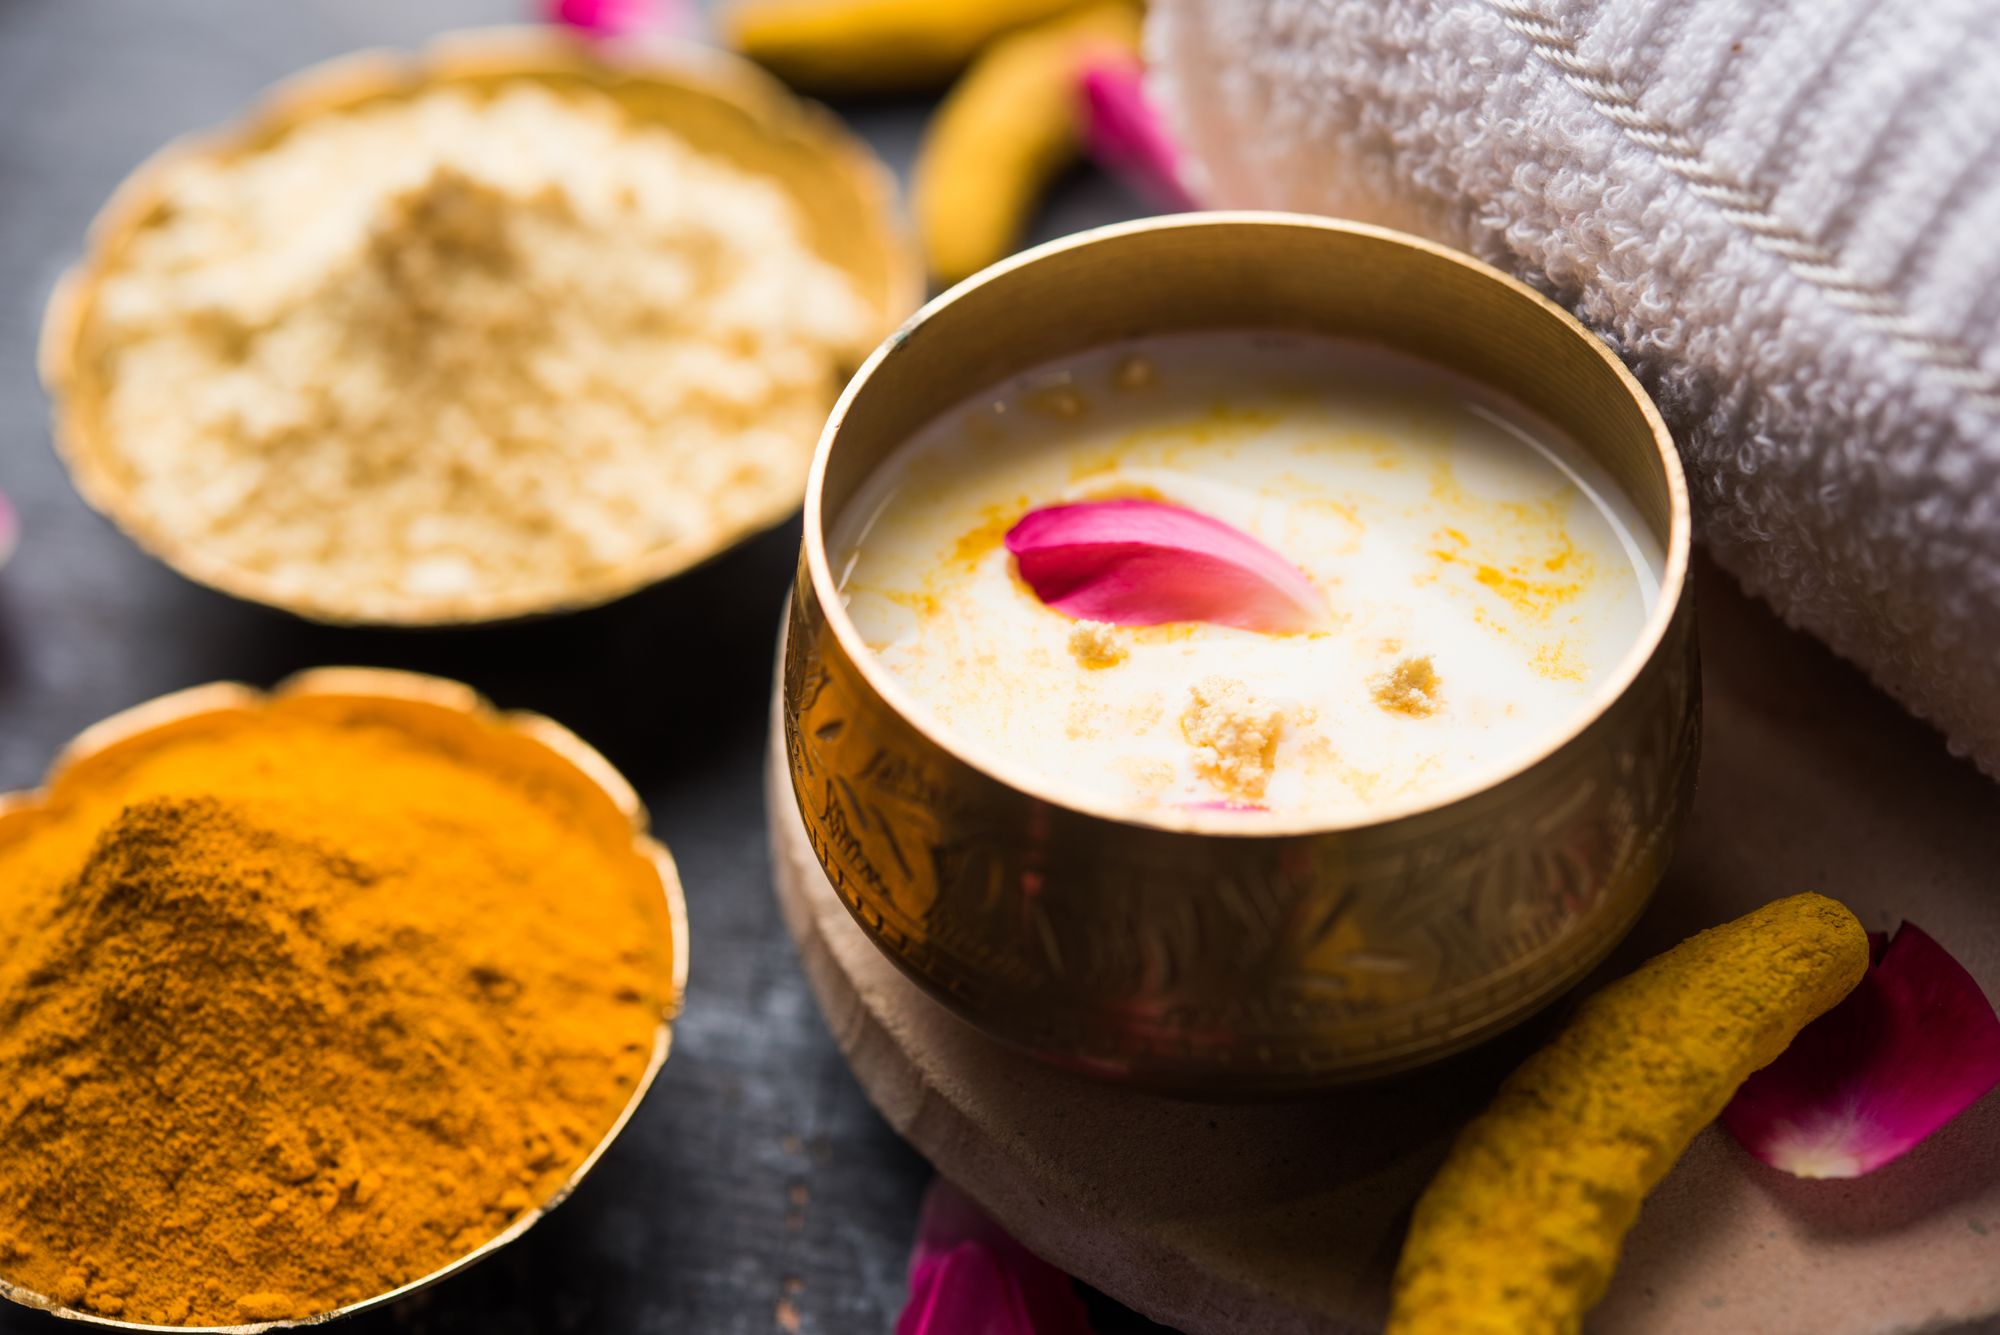 Turmeric and Gram Flour by  Indian Food Images | www.shutterstock.com